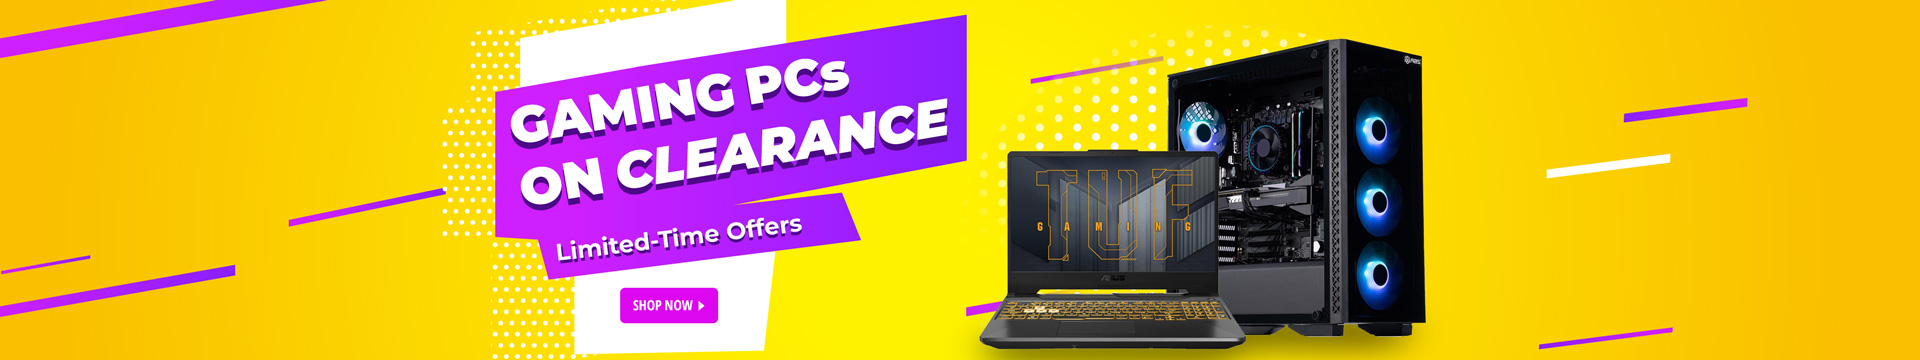 GAMING PCS ON CLEARANCE